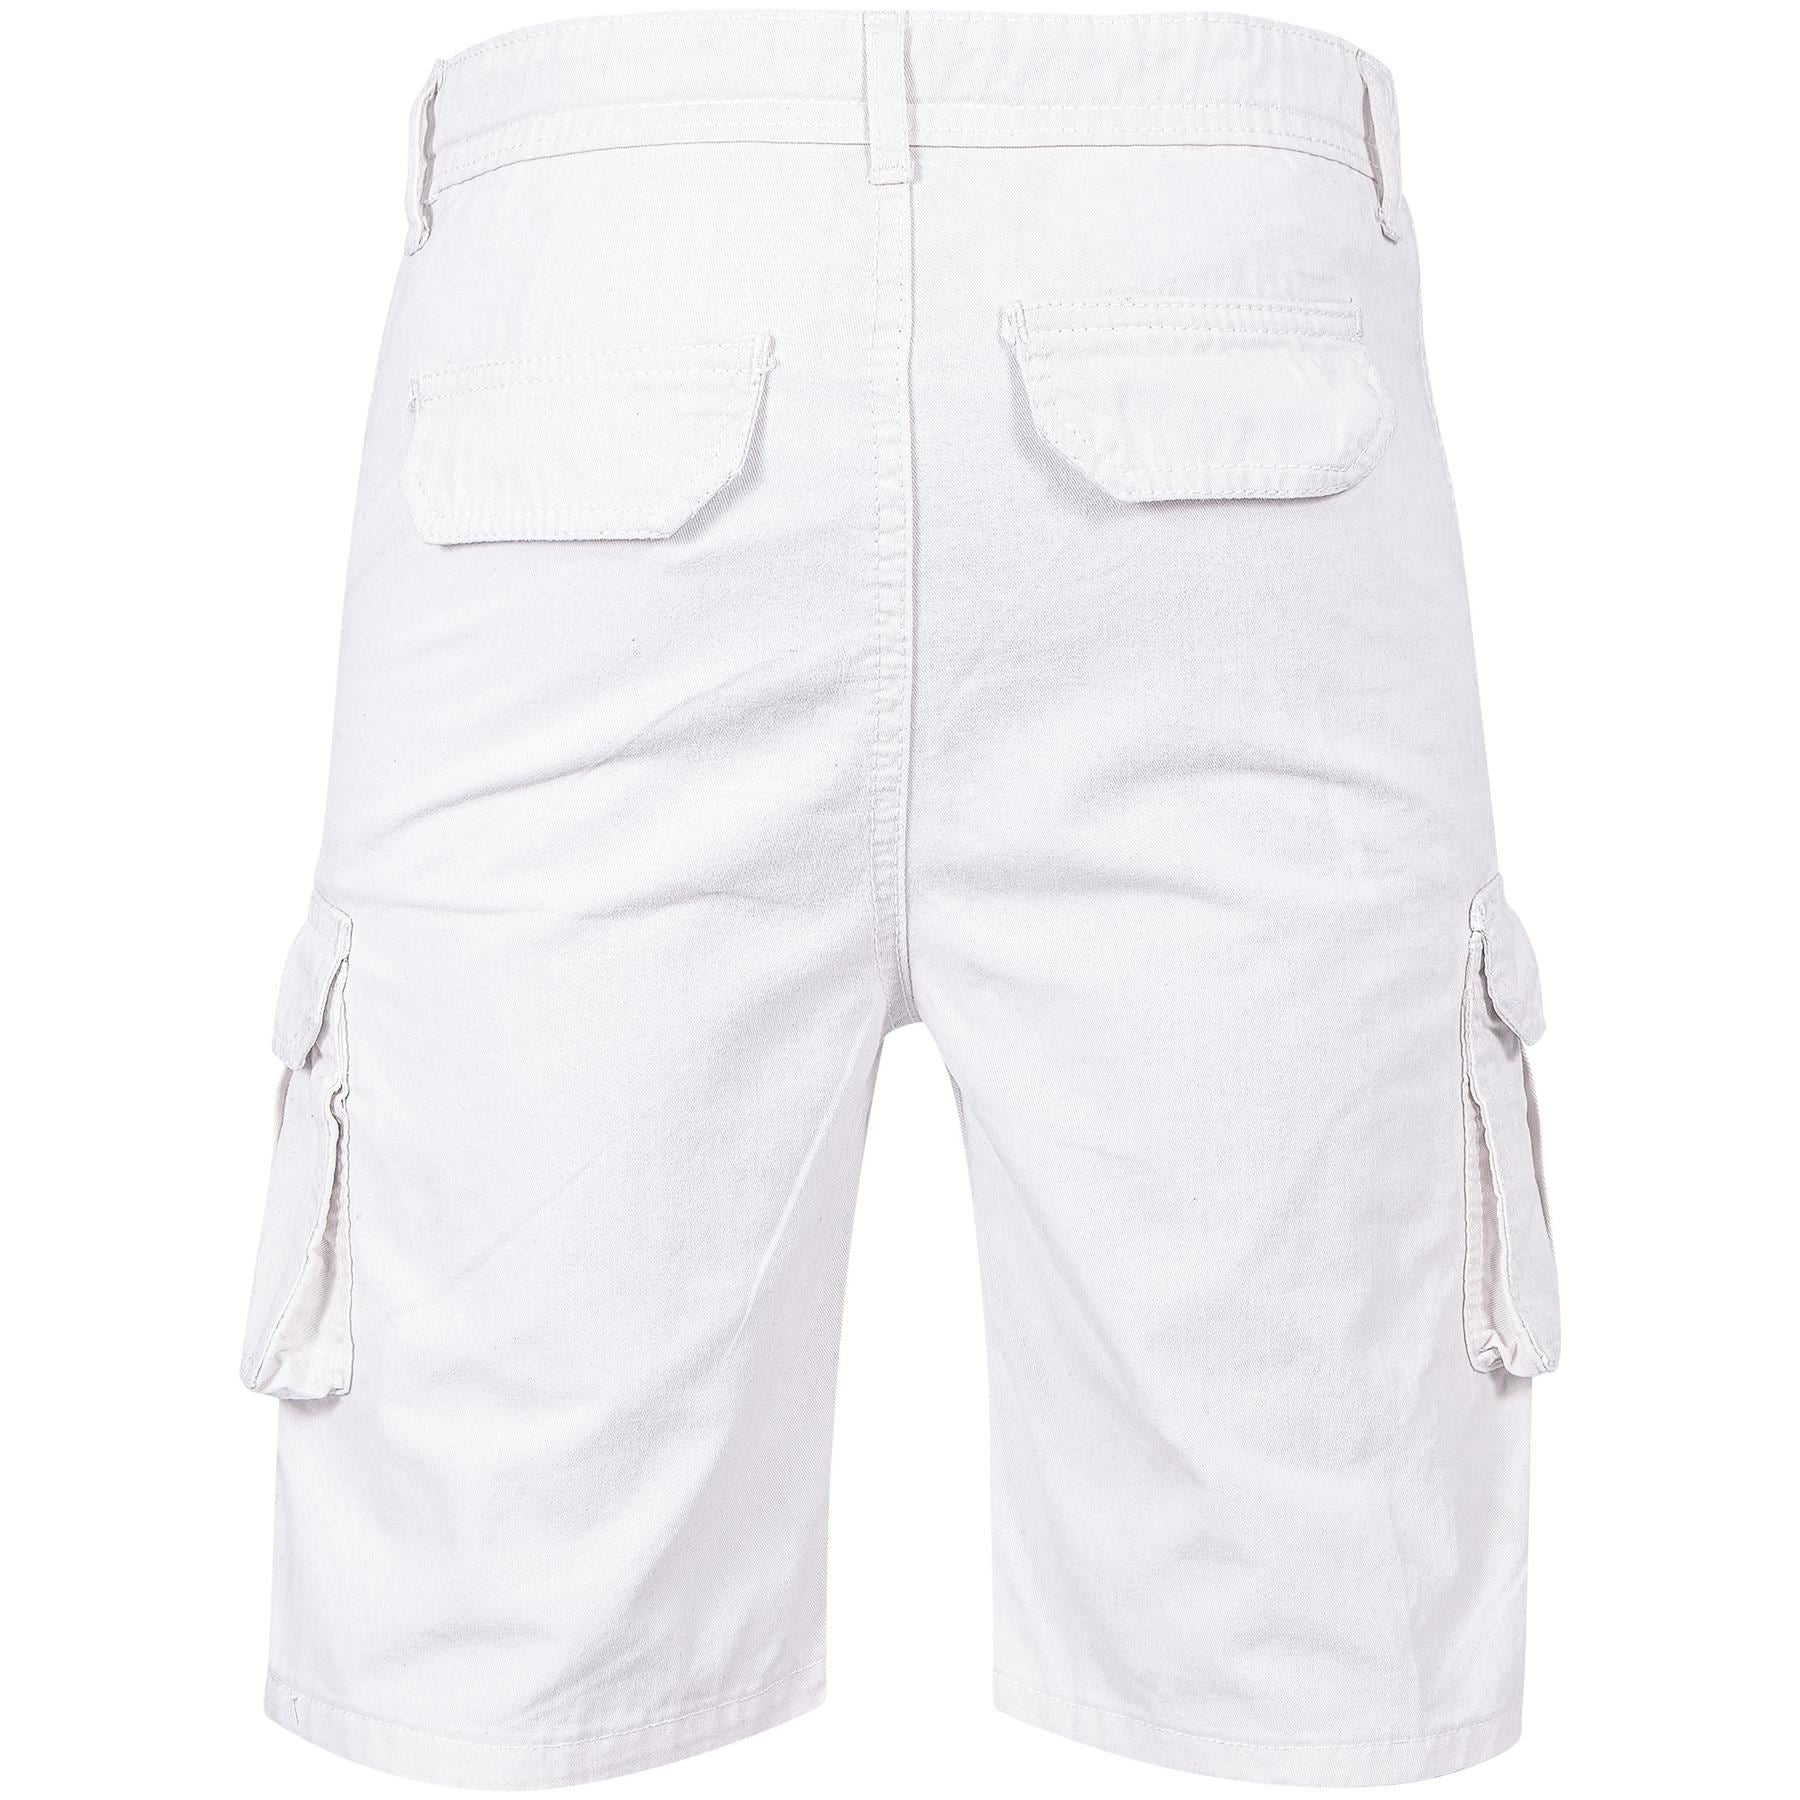 Cargo Shorts Casual Combat Trendy White Multi Pocket Summer Cool Lightweight